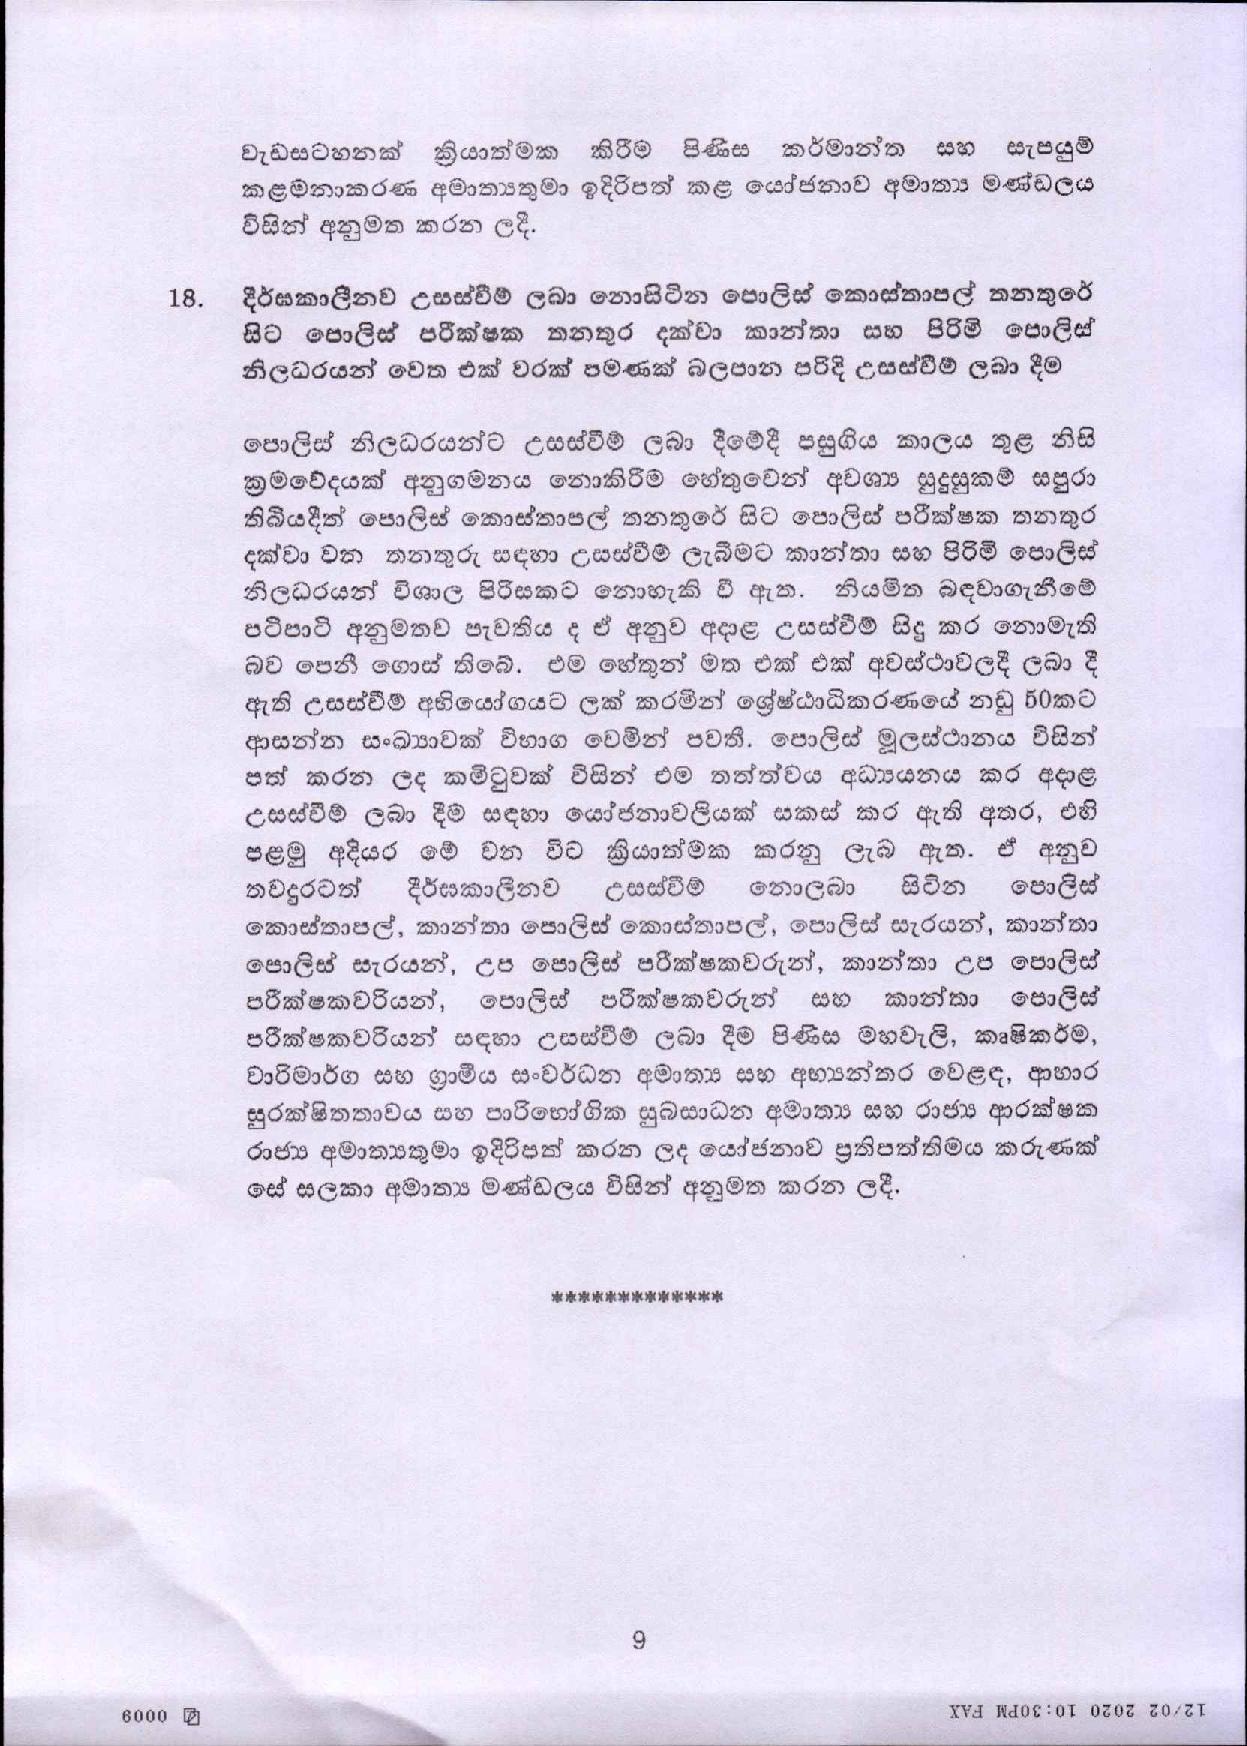 Cabinet Decision on 12.02.2020 page 009